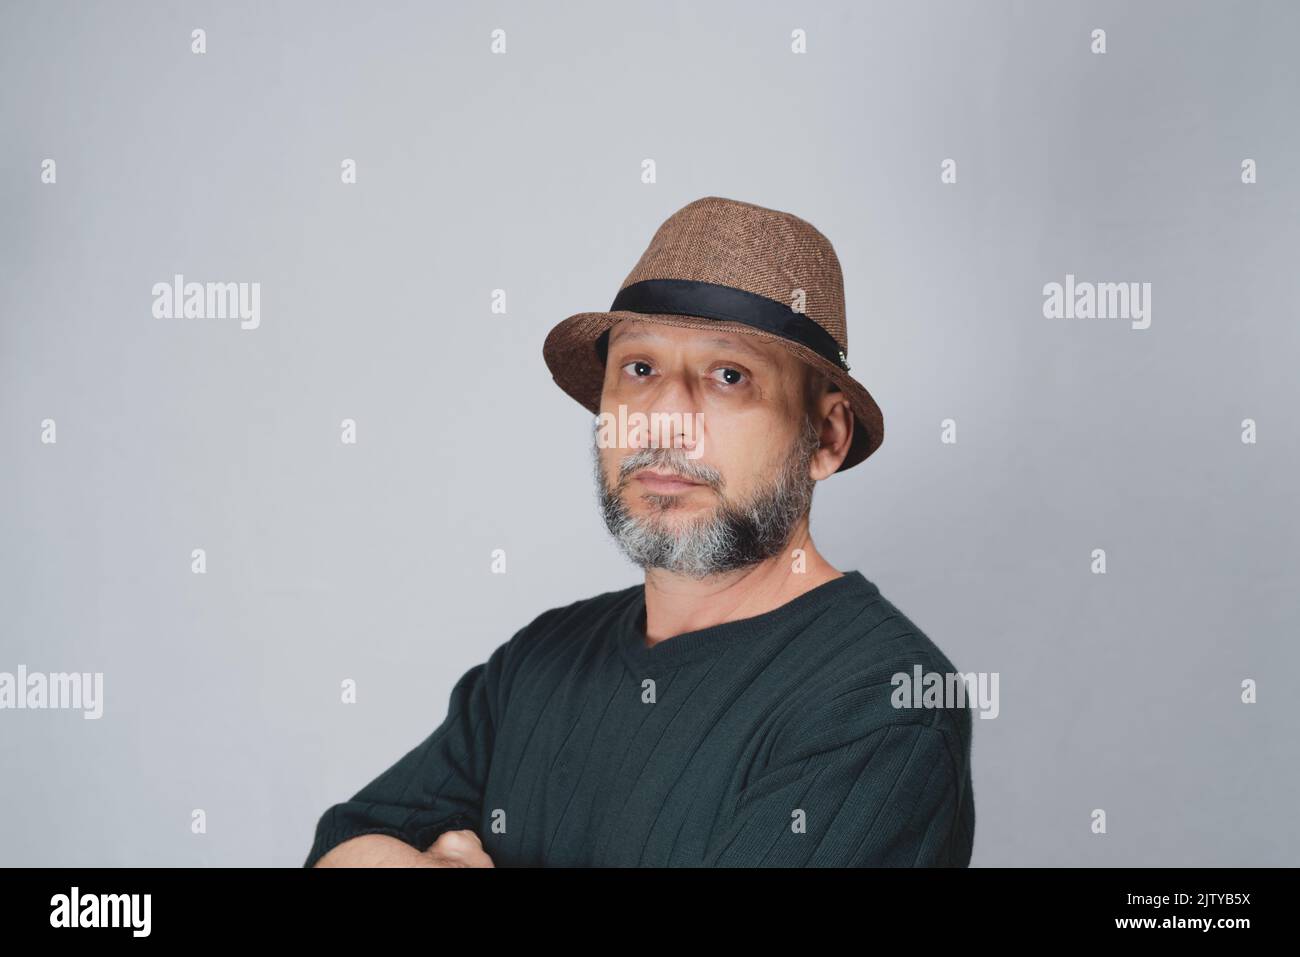 Portrait of mature man standing on white background. Bald bearded man in a brown hat. Formal style. Stock Photo